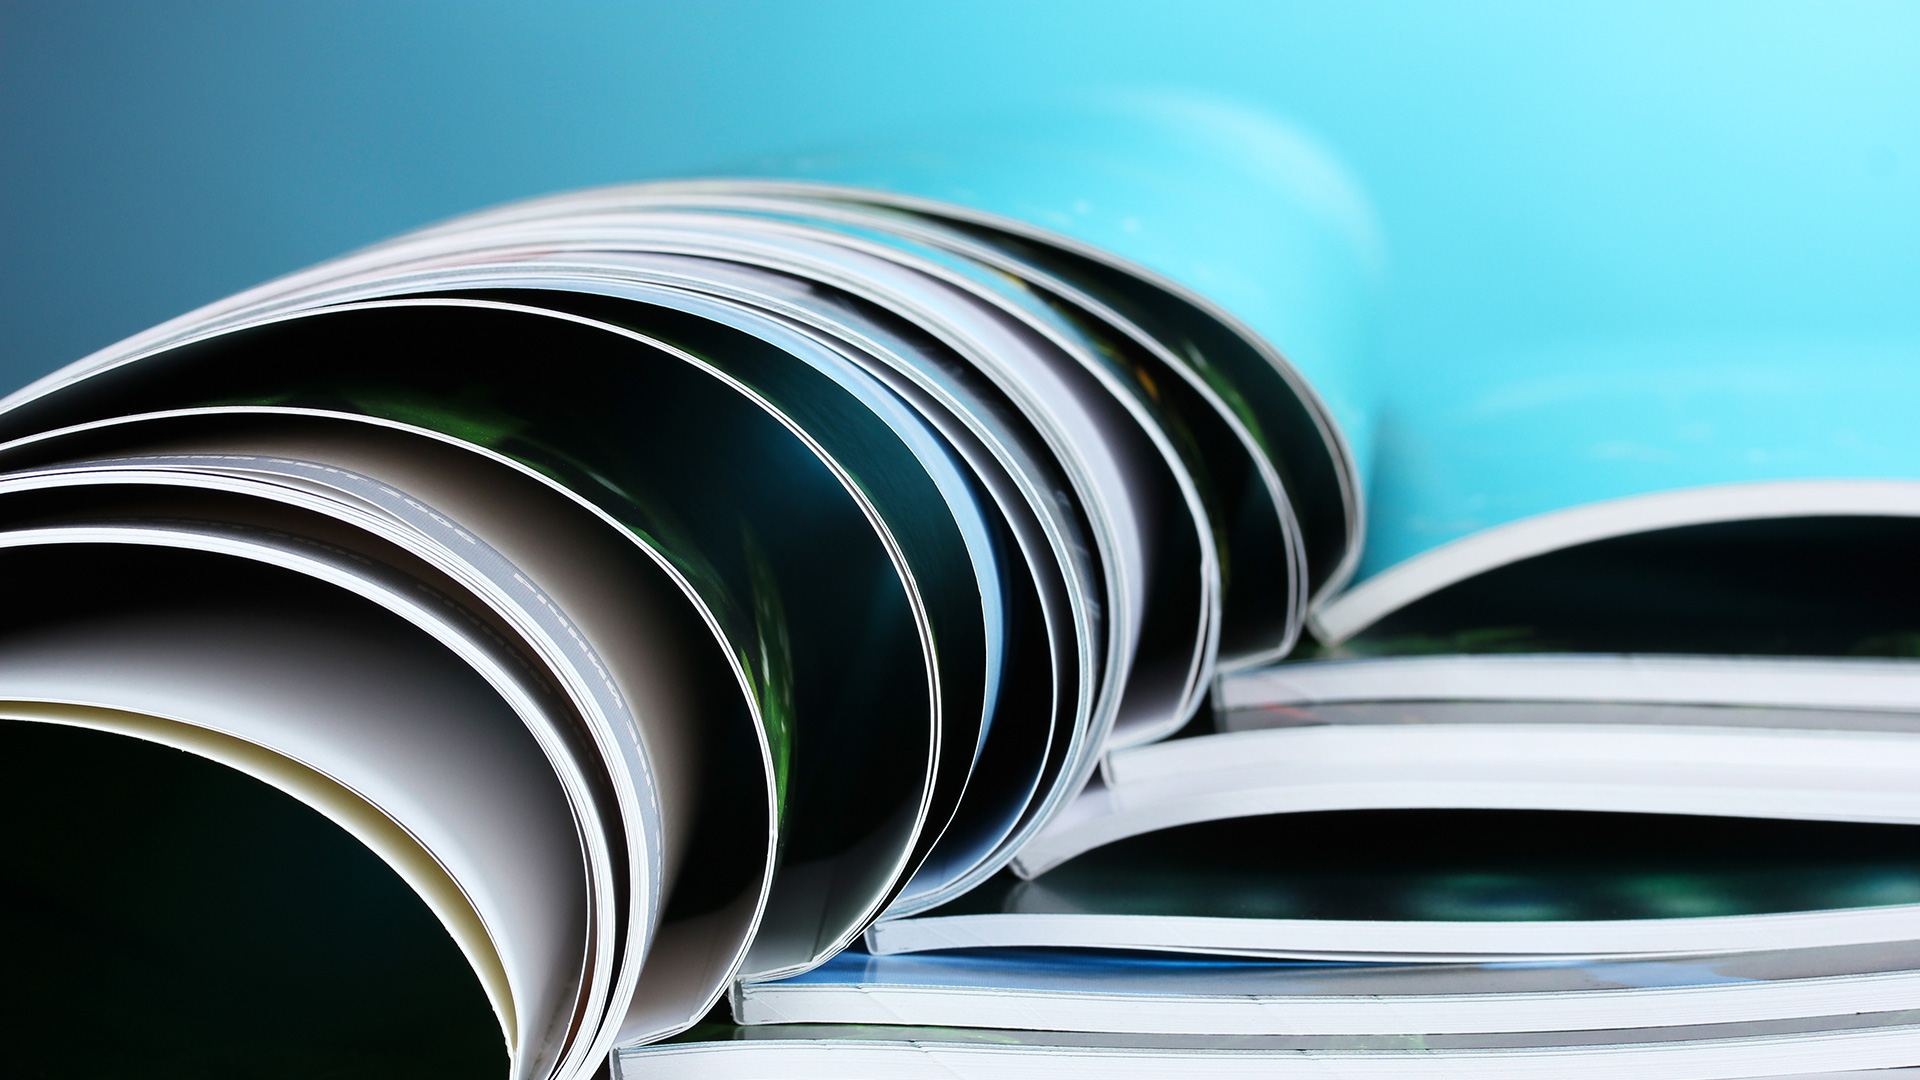 Close up showing curved pages of many open booklets, stacked together.